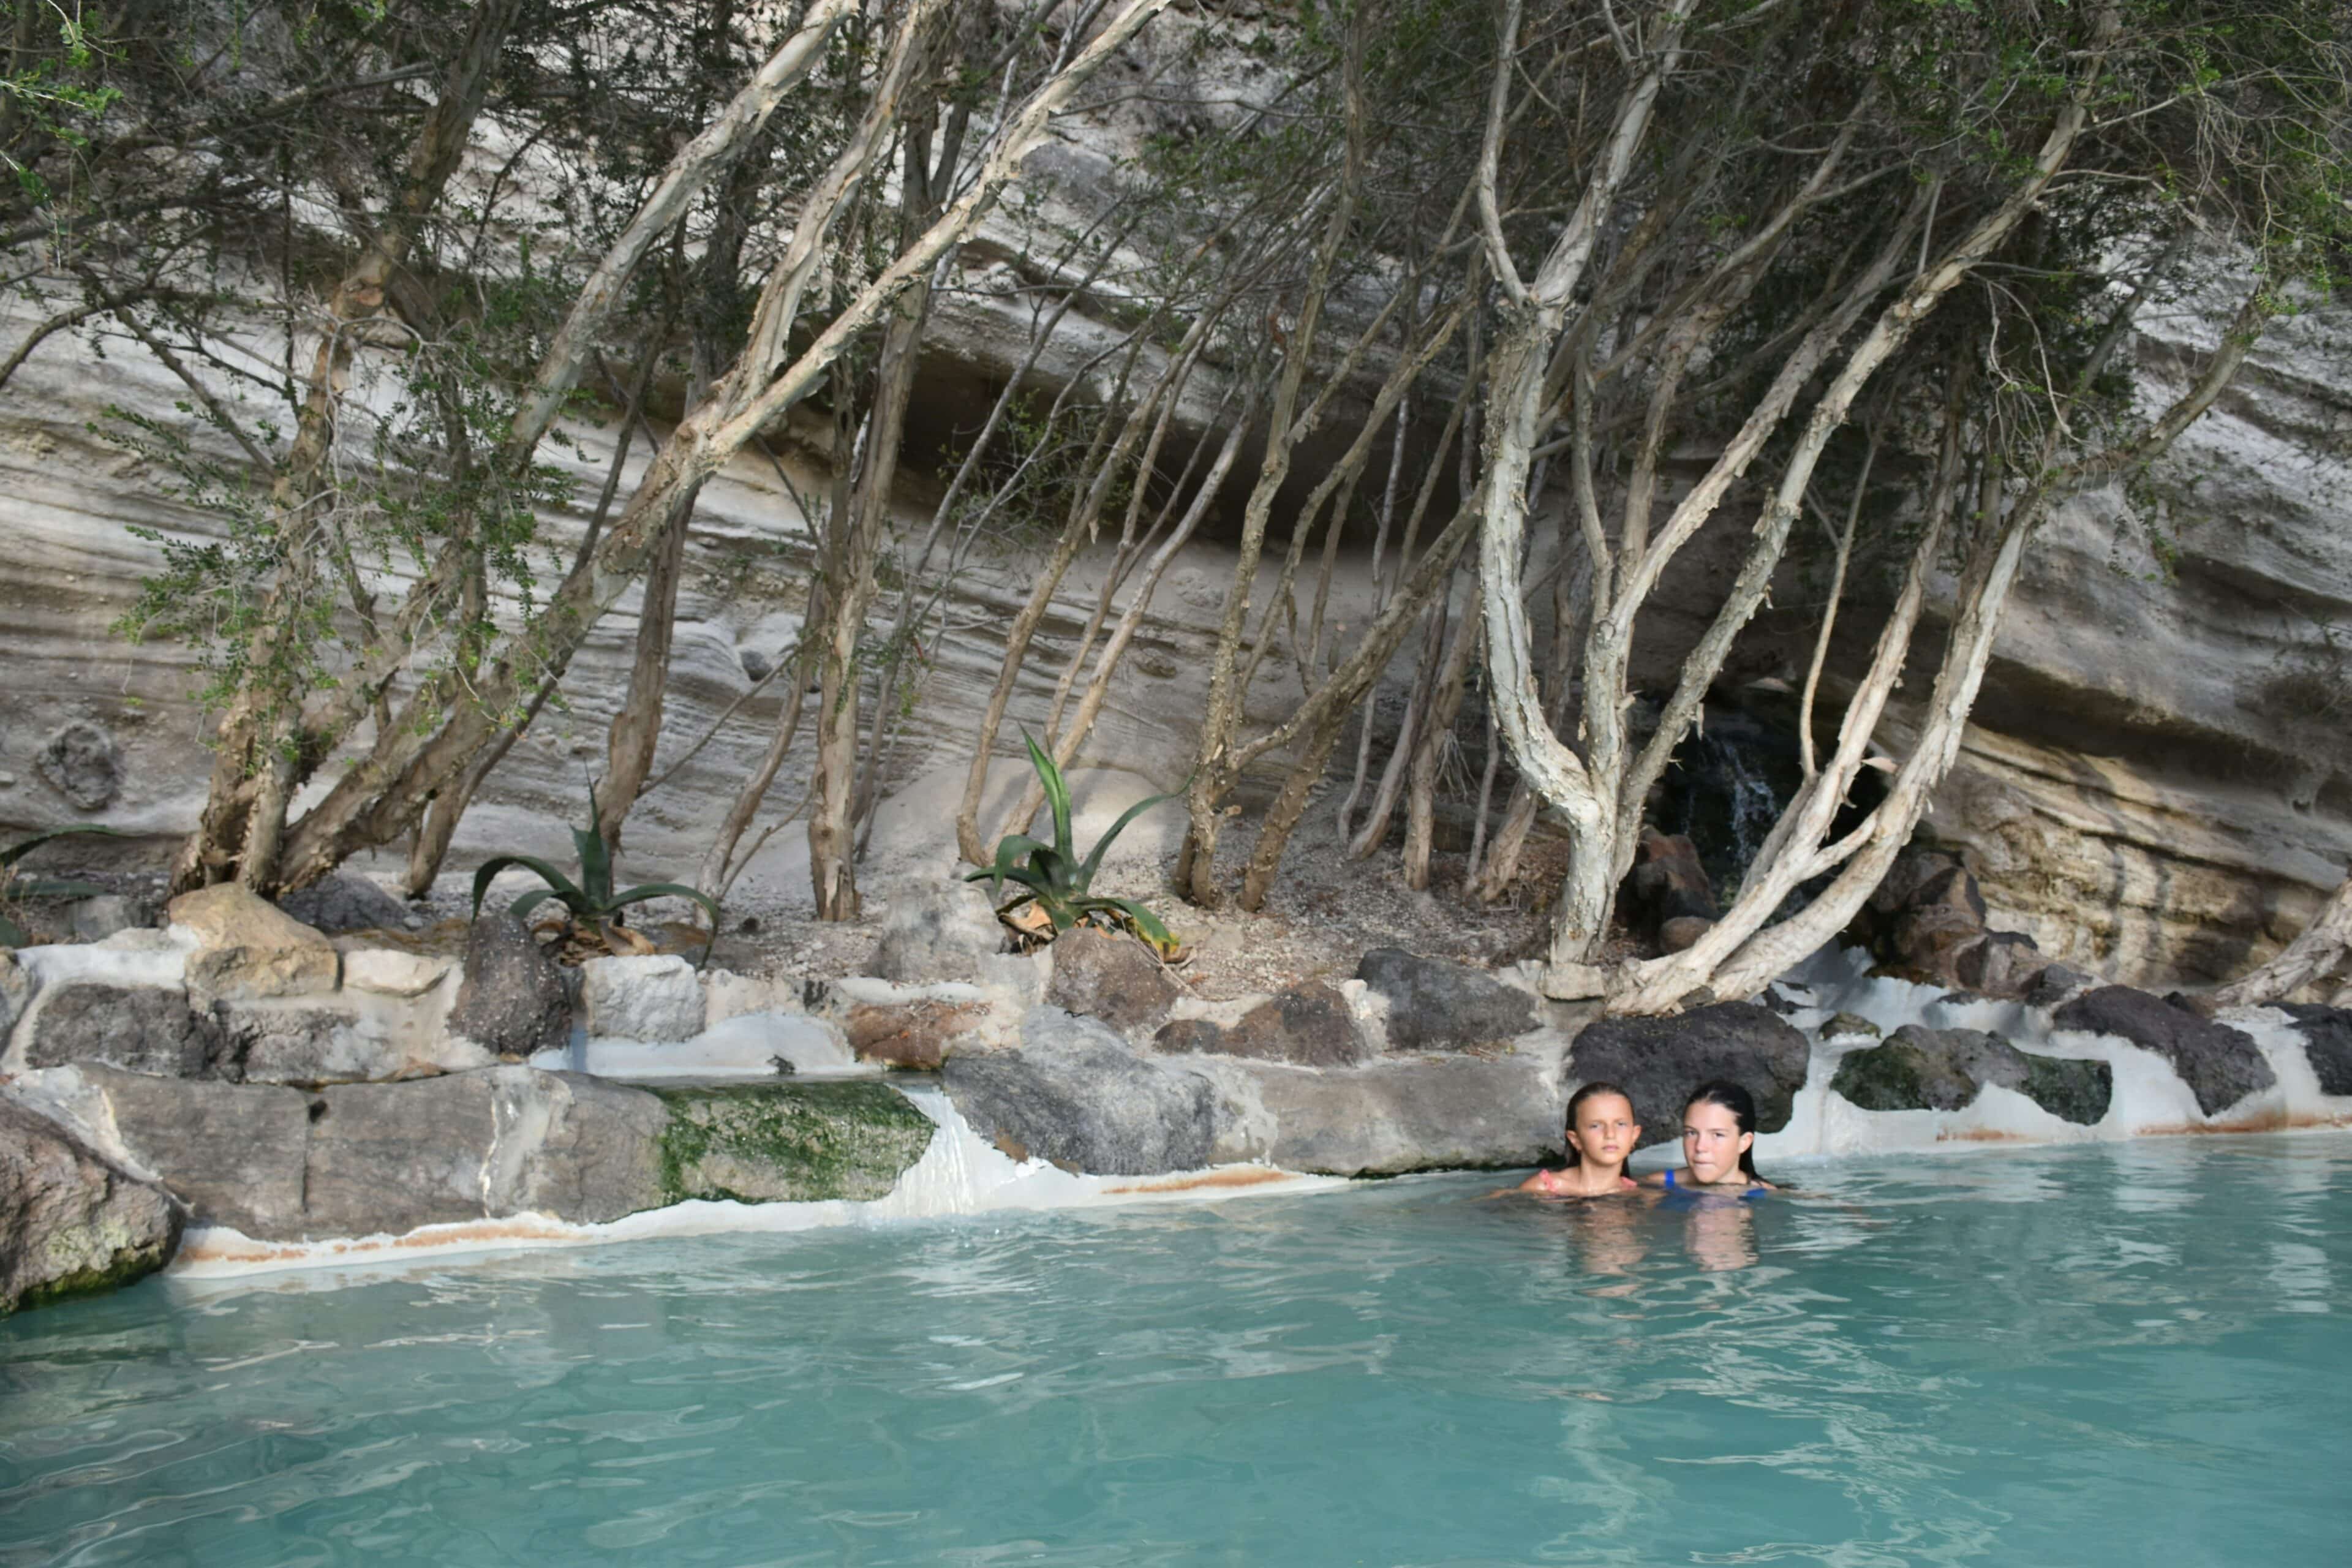 Relaxation in Costa Rica's Thermal Baths